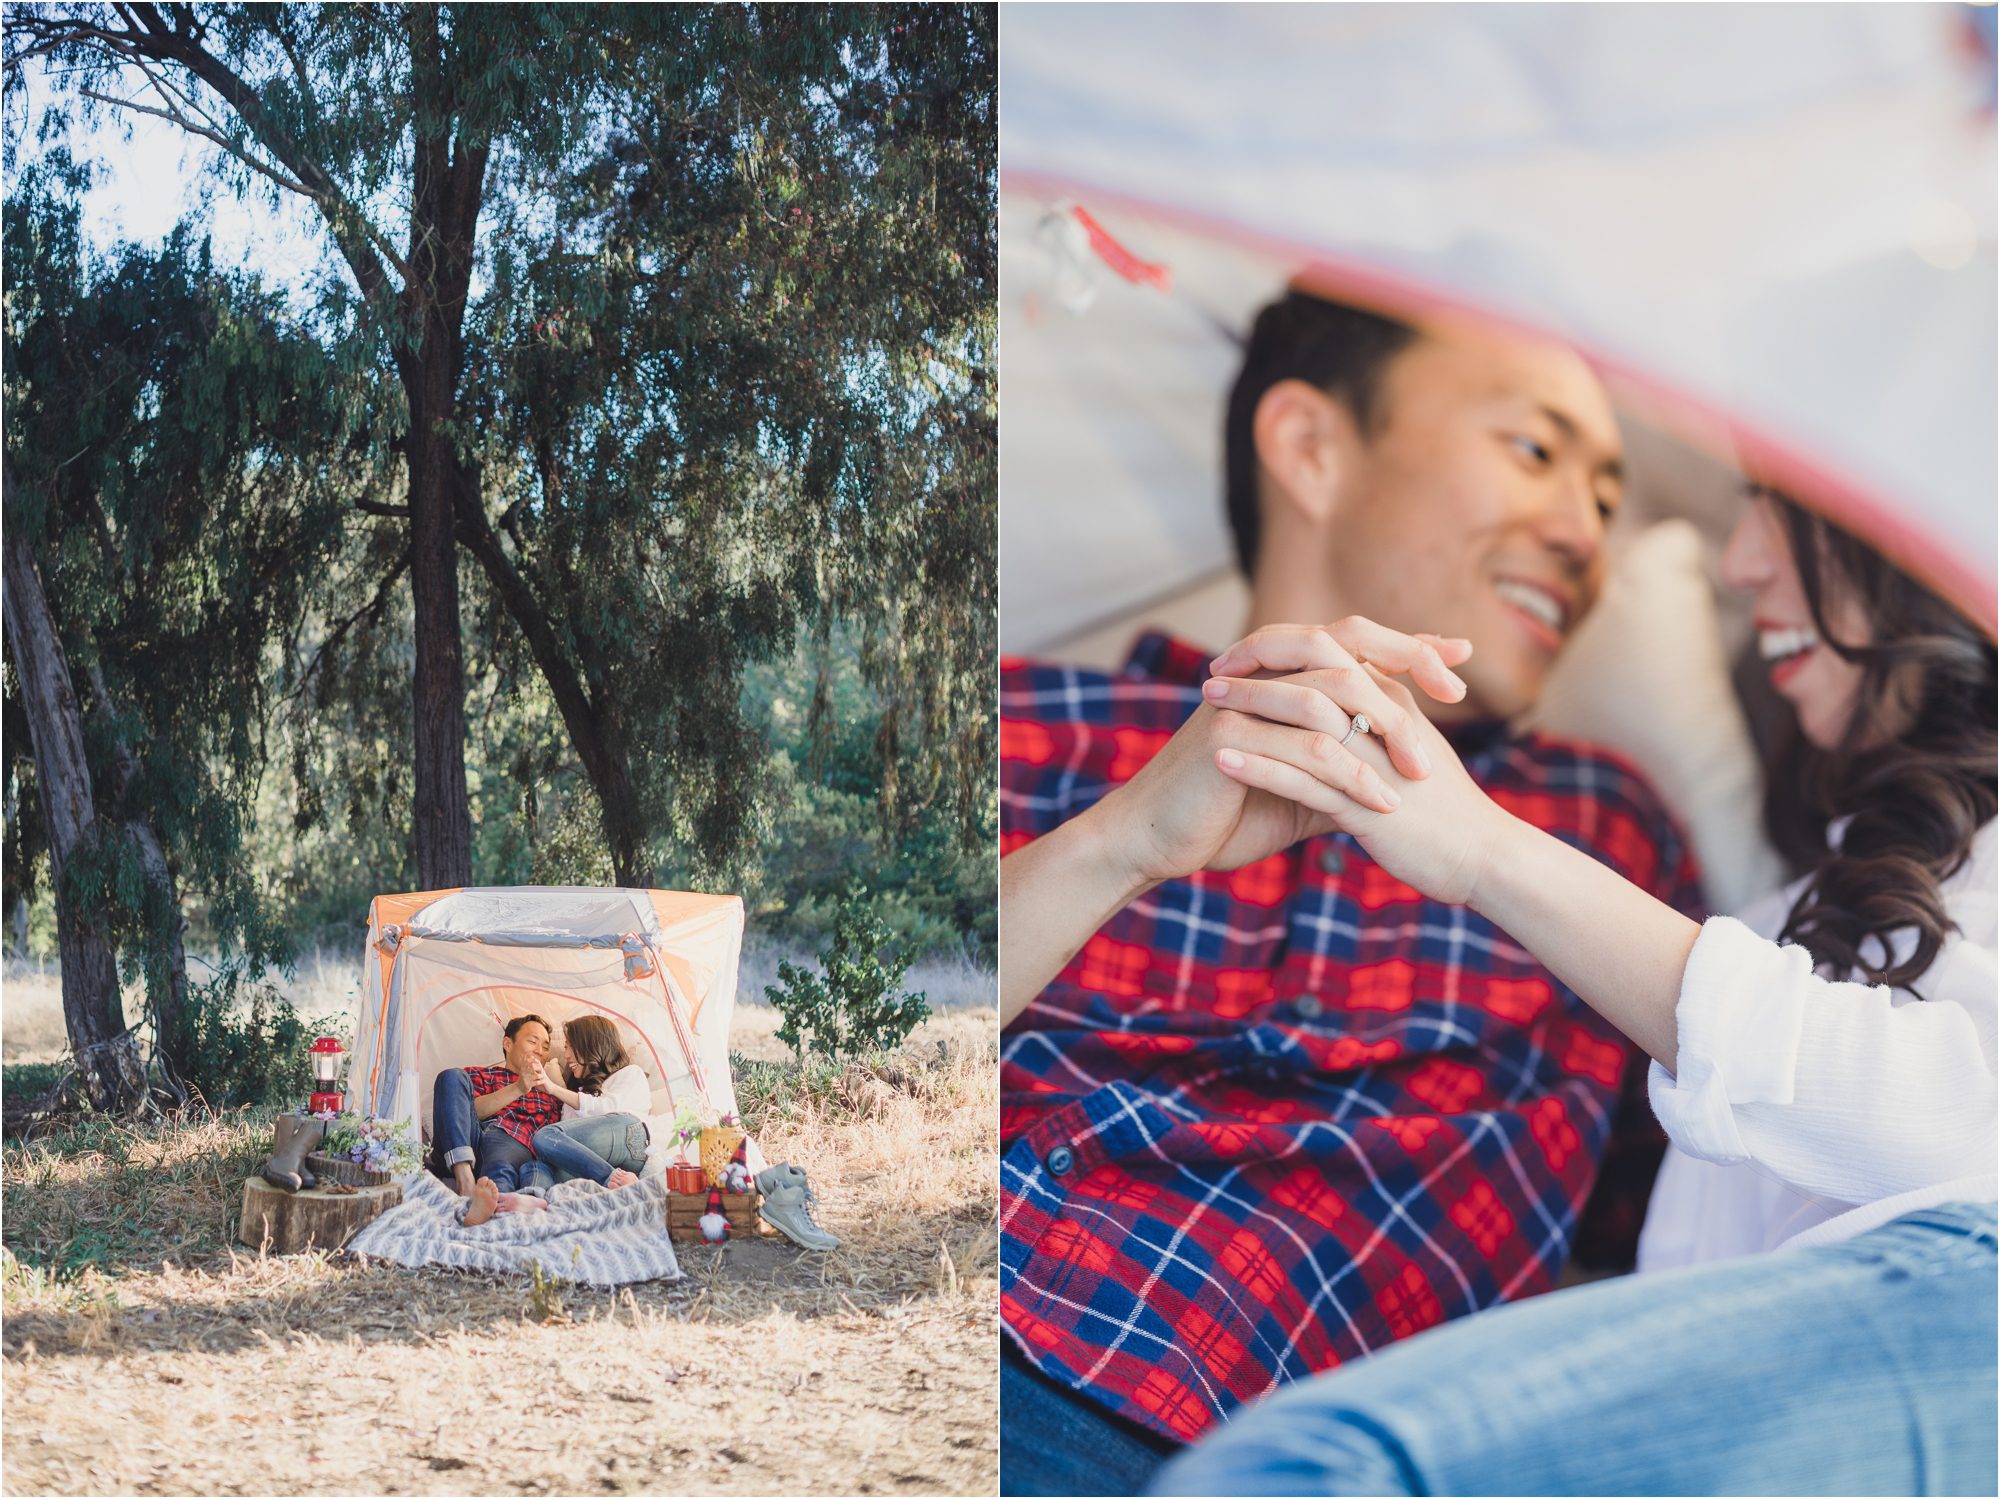 Camping Inspired Engagement 0002